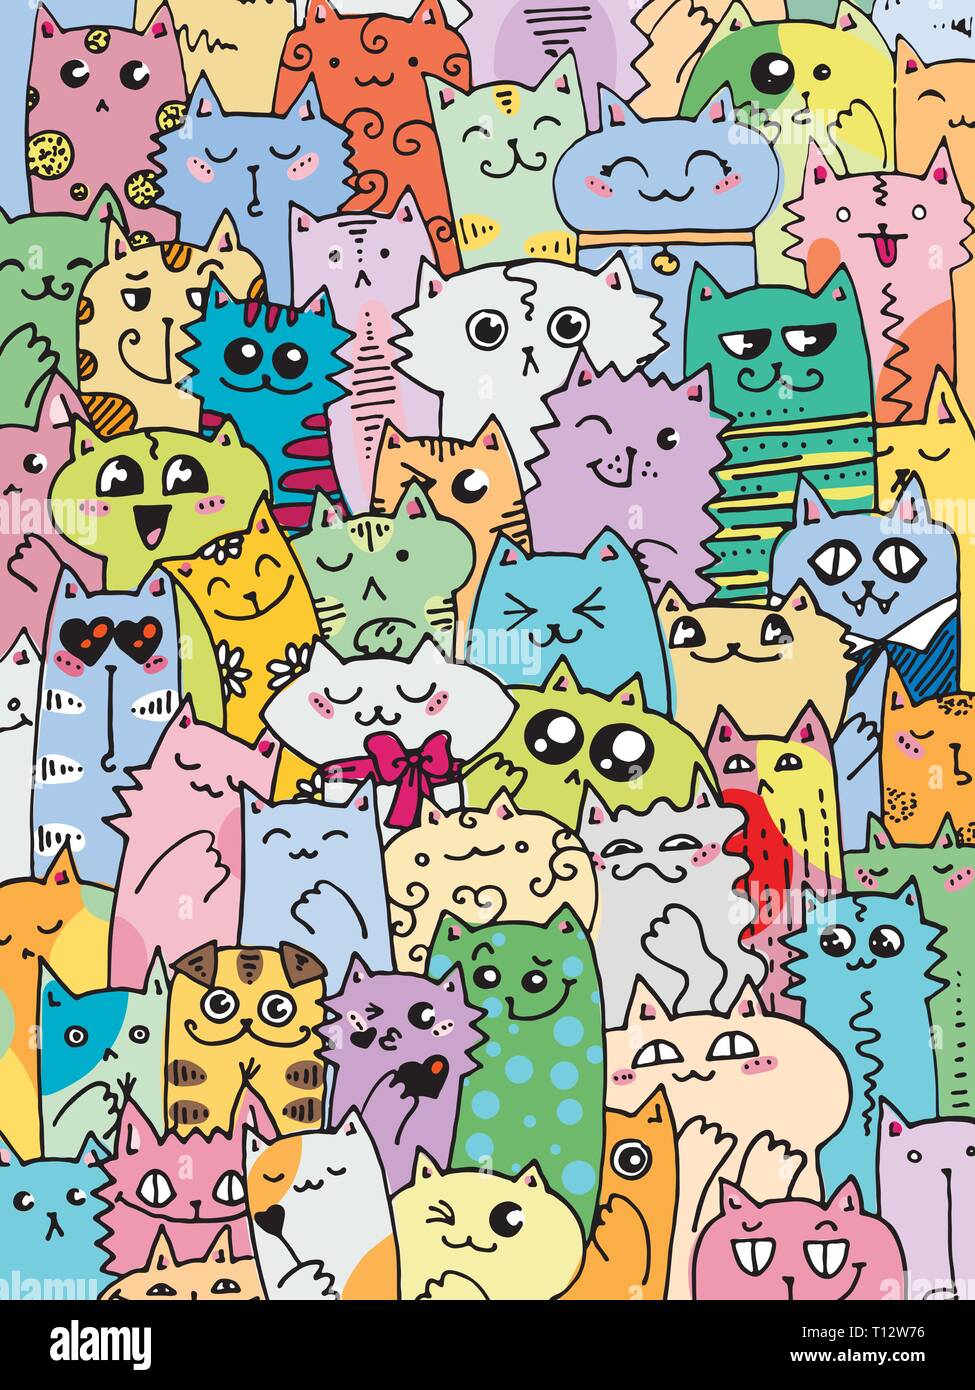 66 Kawaii Cats Coloring Book Free Coloringbook Pro - app insights guide for barbie roblox apptopia